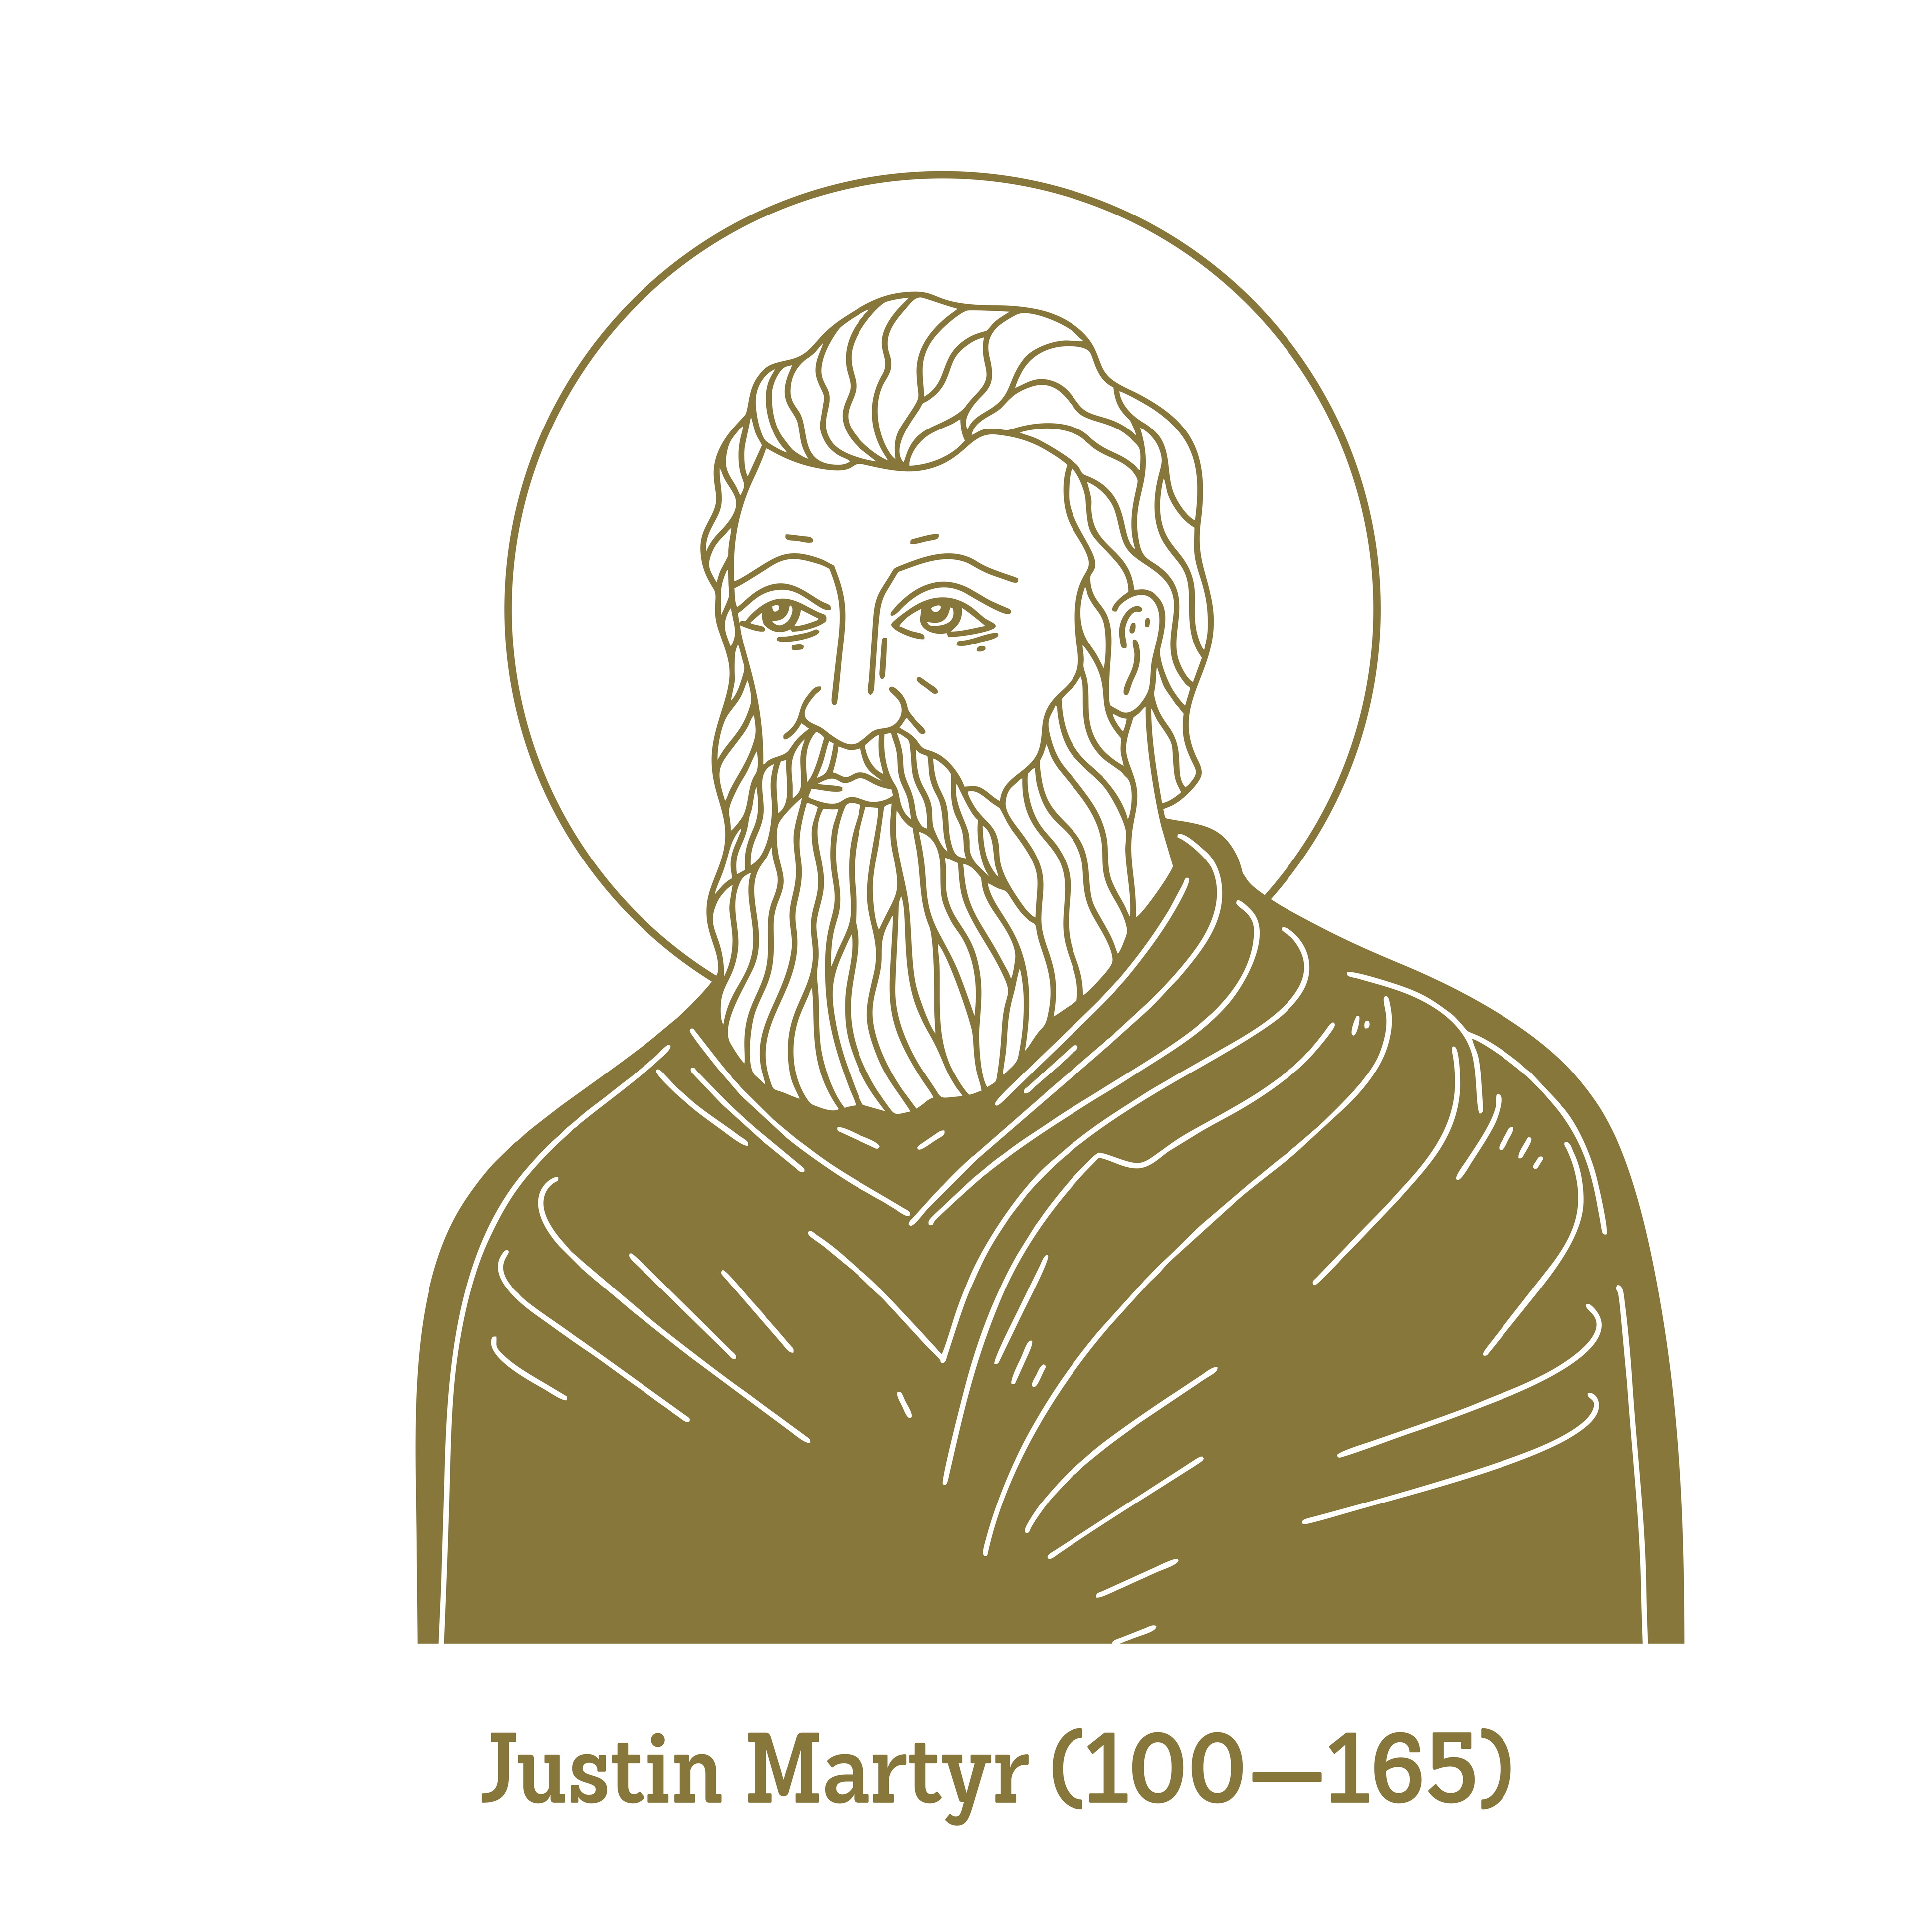 https://lastmessageofmercy.com/images/books/The%20Lord's%20Day/Justin_Martyr.jpeg